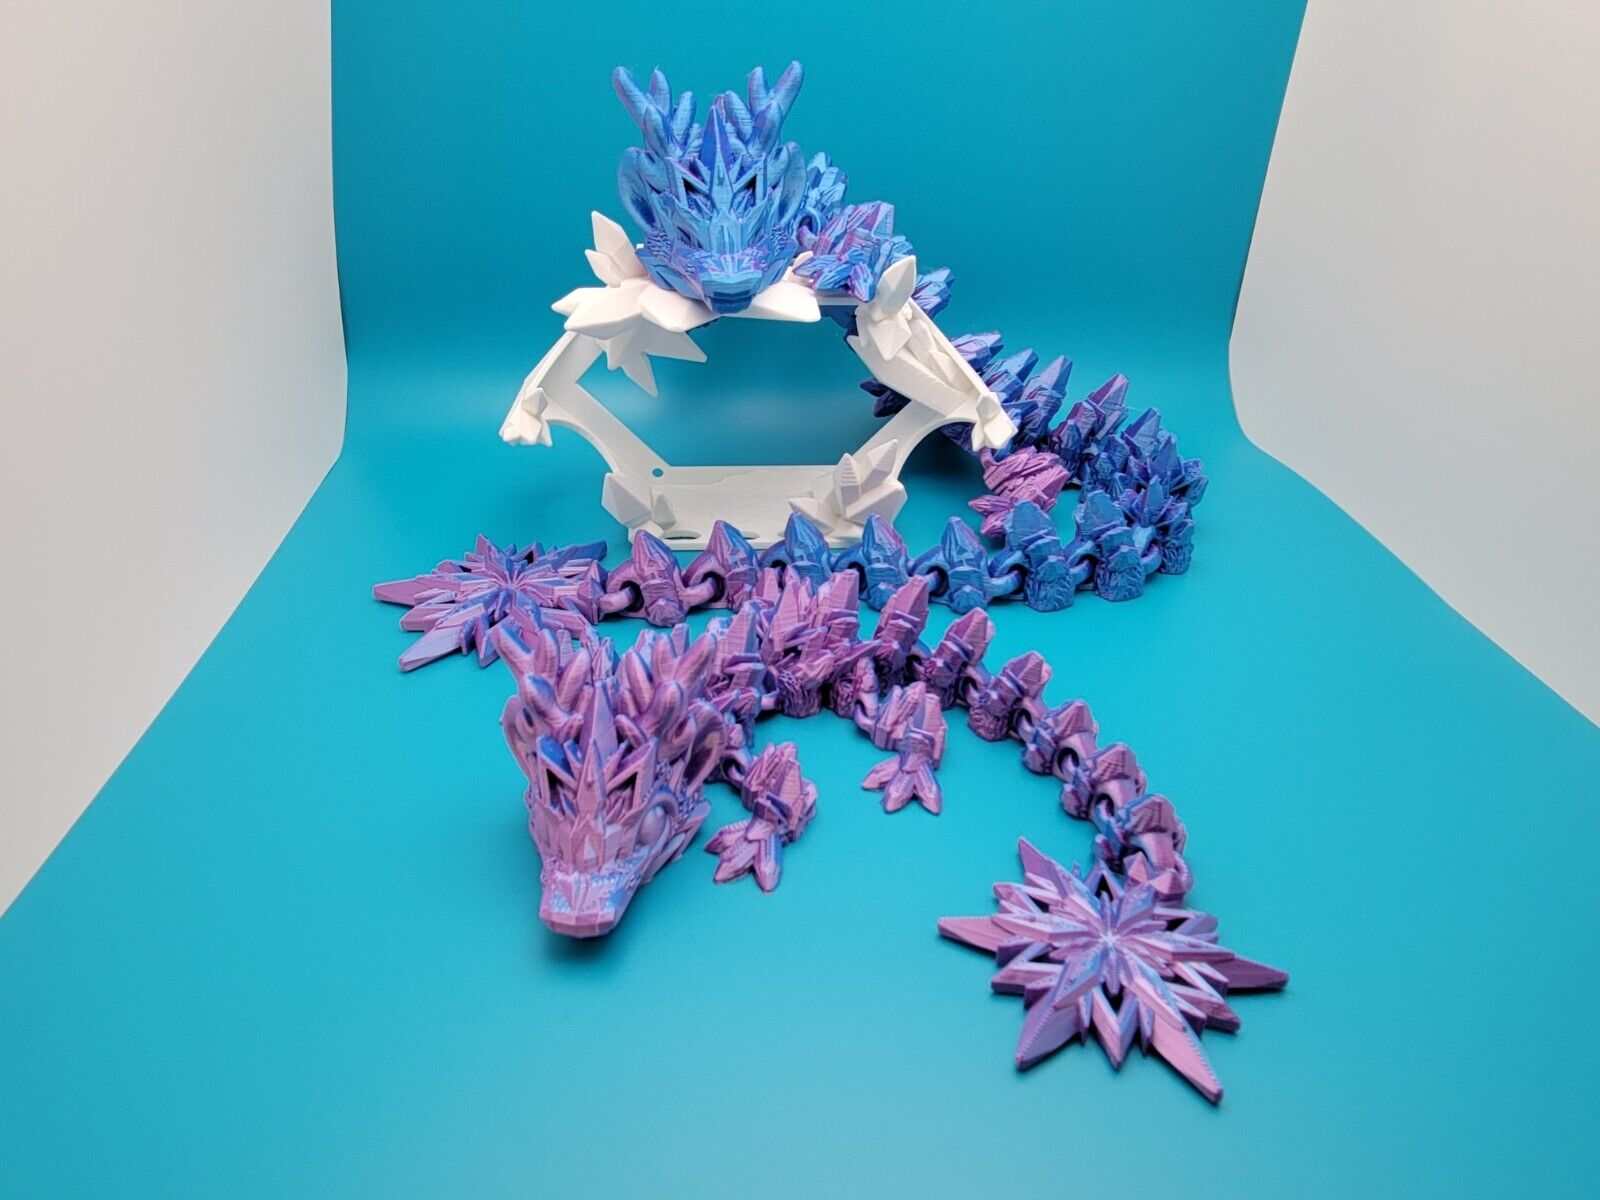 Winter Frost Flexi Dragon - 3D Printed Articulating Fidget Toy